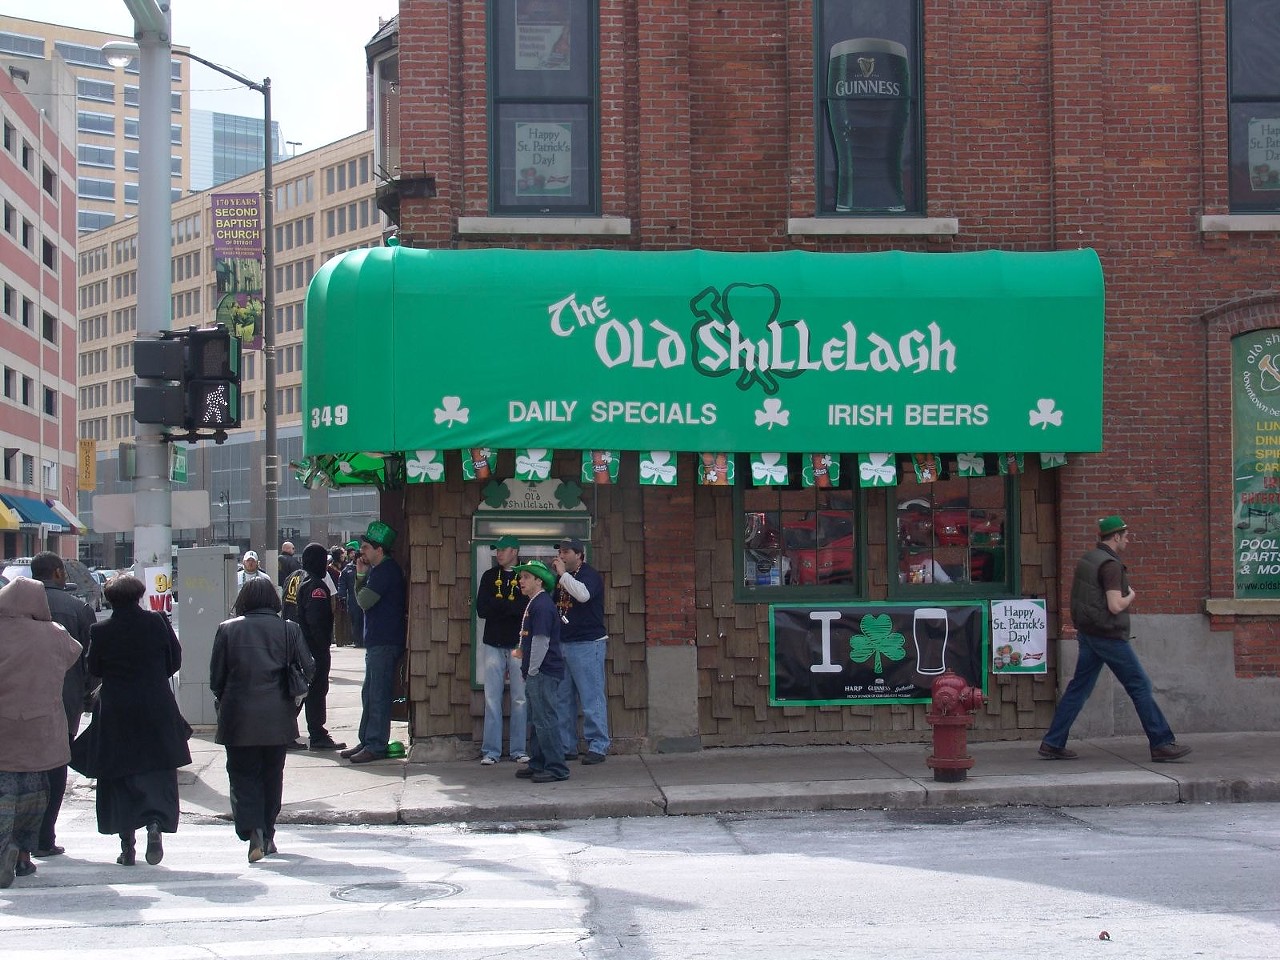 Old Shillelagh
349 Monroe St., Detroit; oldshillelagh.com
This bar has been voted Best Irish Pub in the Metro Times Best of Detroit reader's poll. It's a classic and it's mellow vibe is great for sipping on brews and watching football.